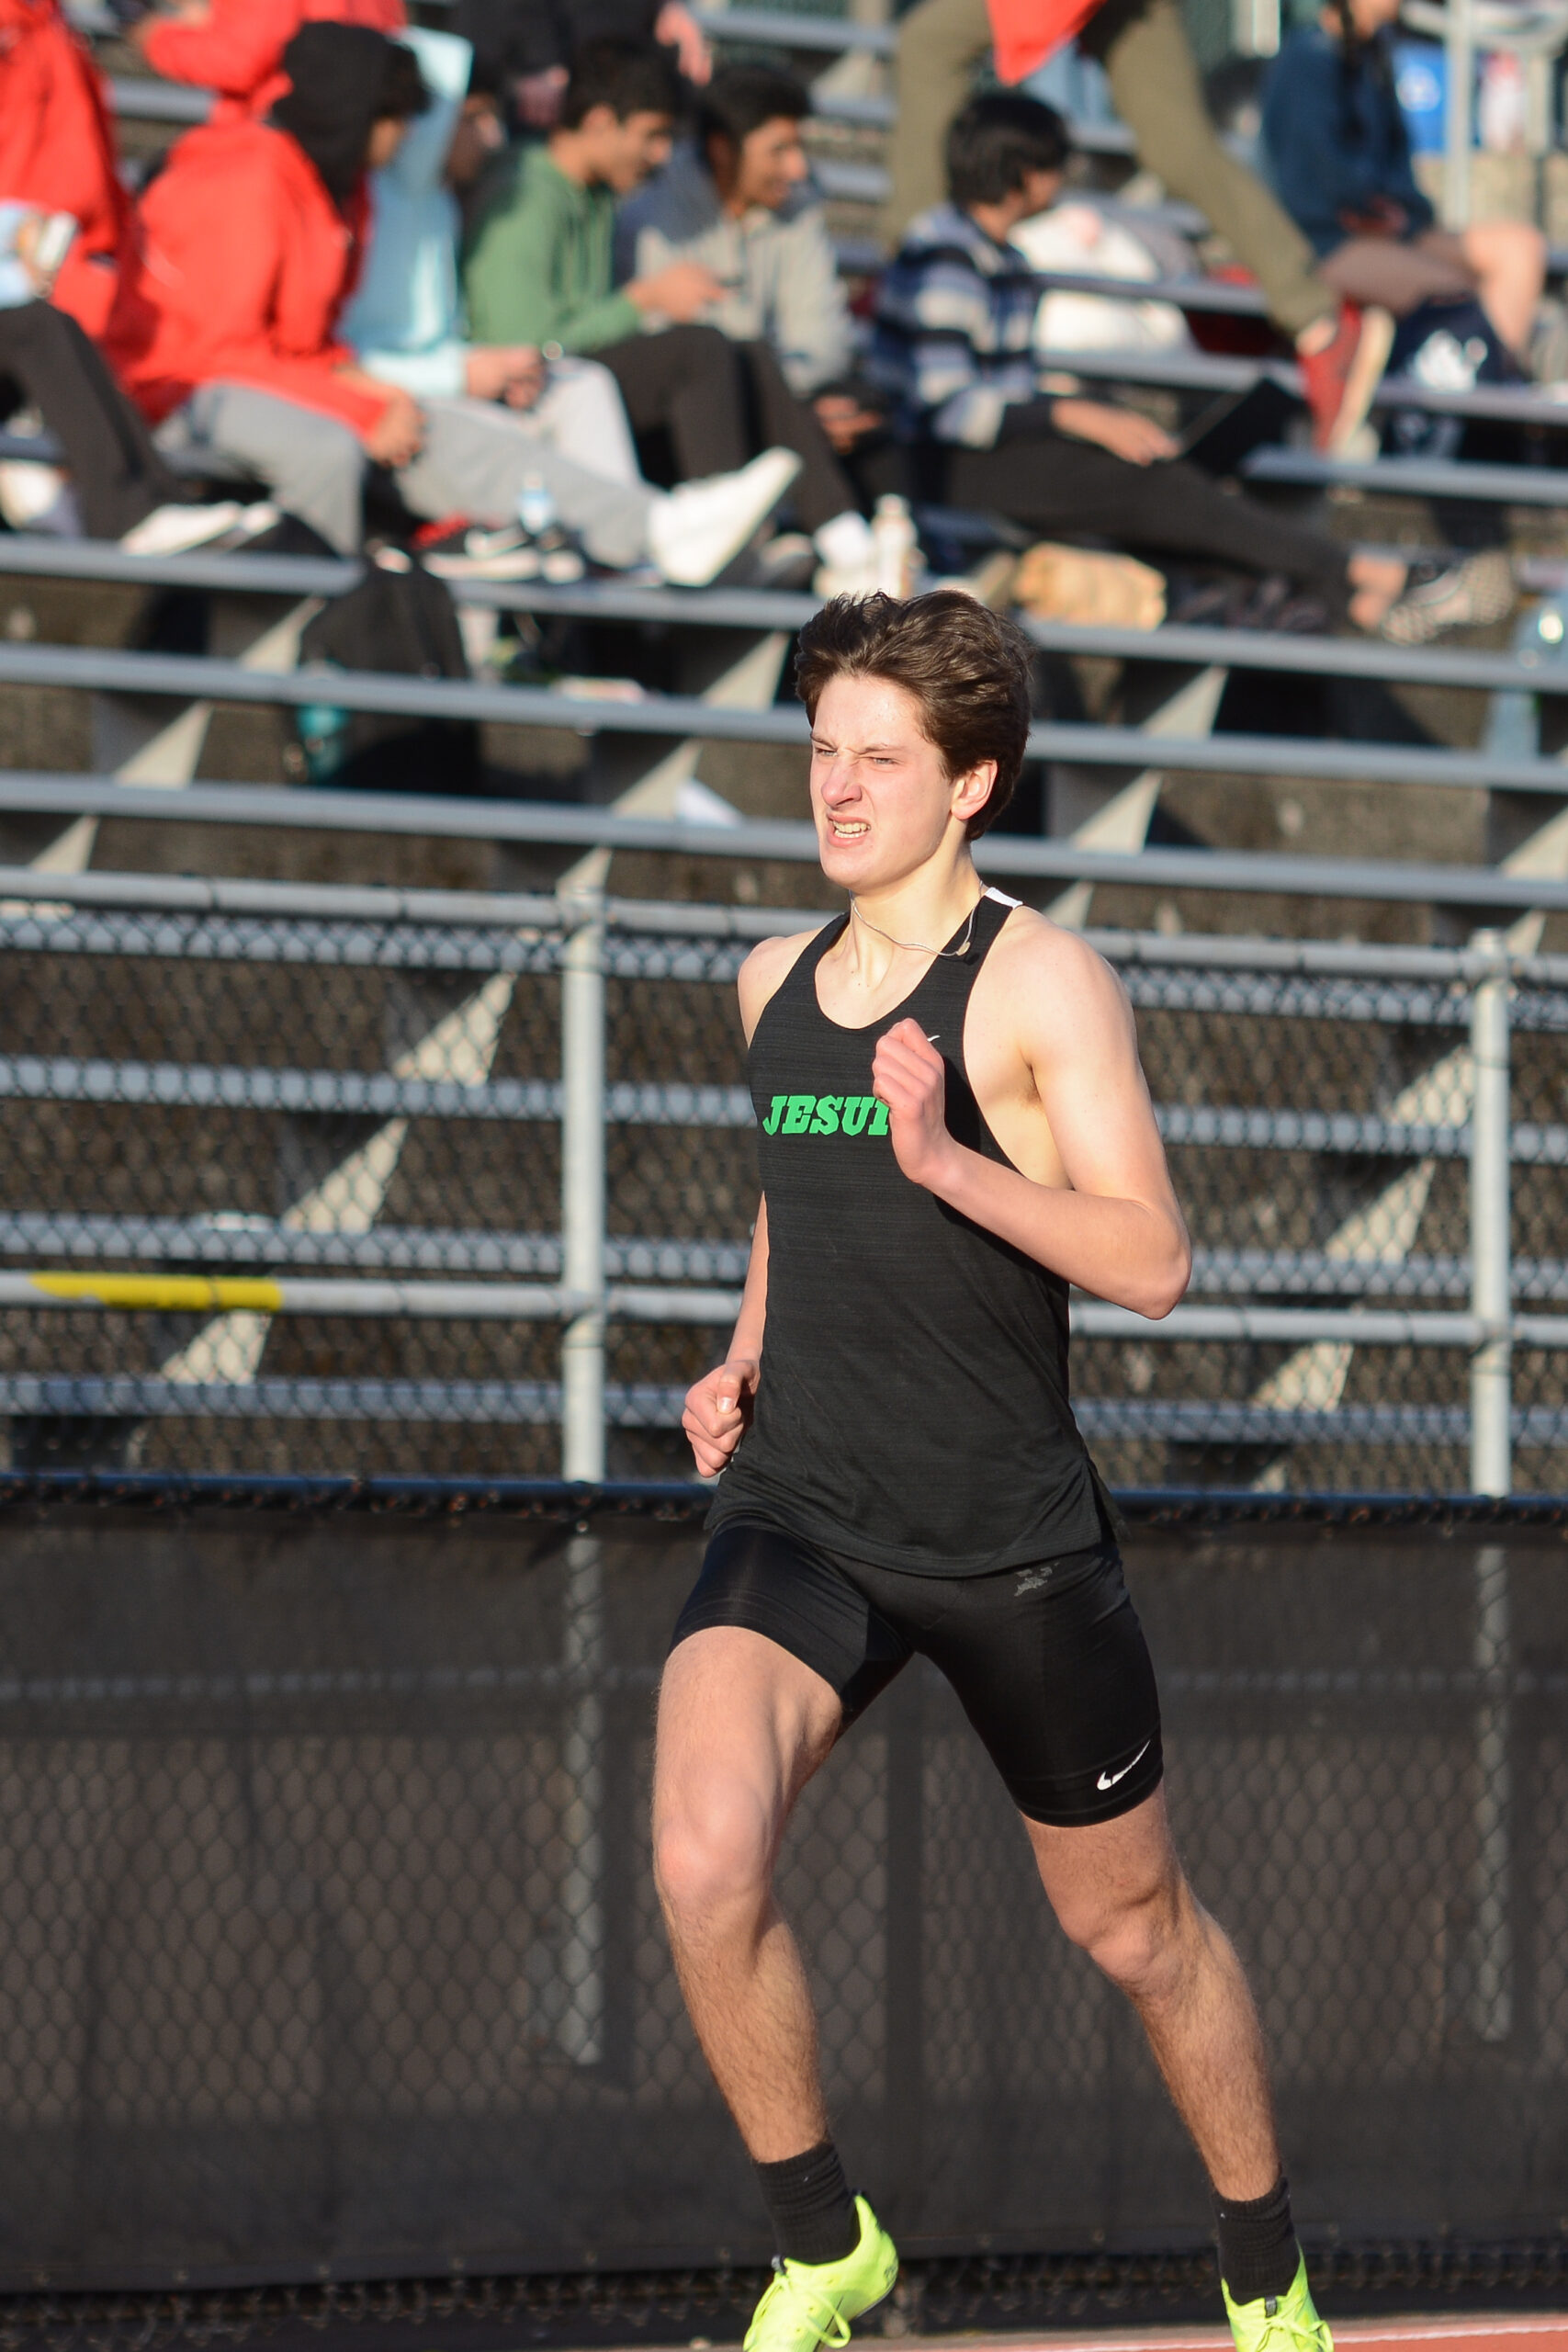 Twilight Relays took over Jesuits track on April 28th, with many competing teams visiting from around the region.